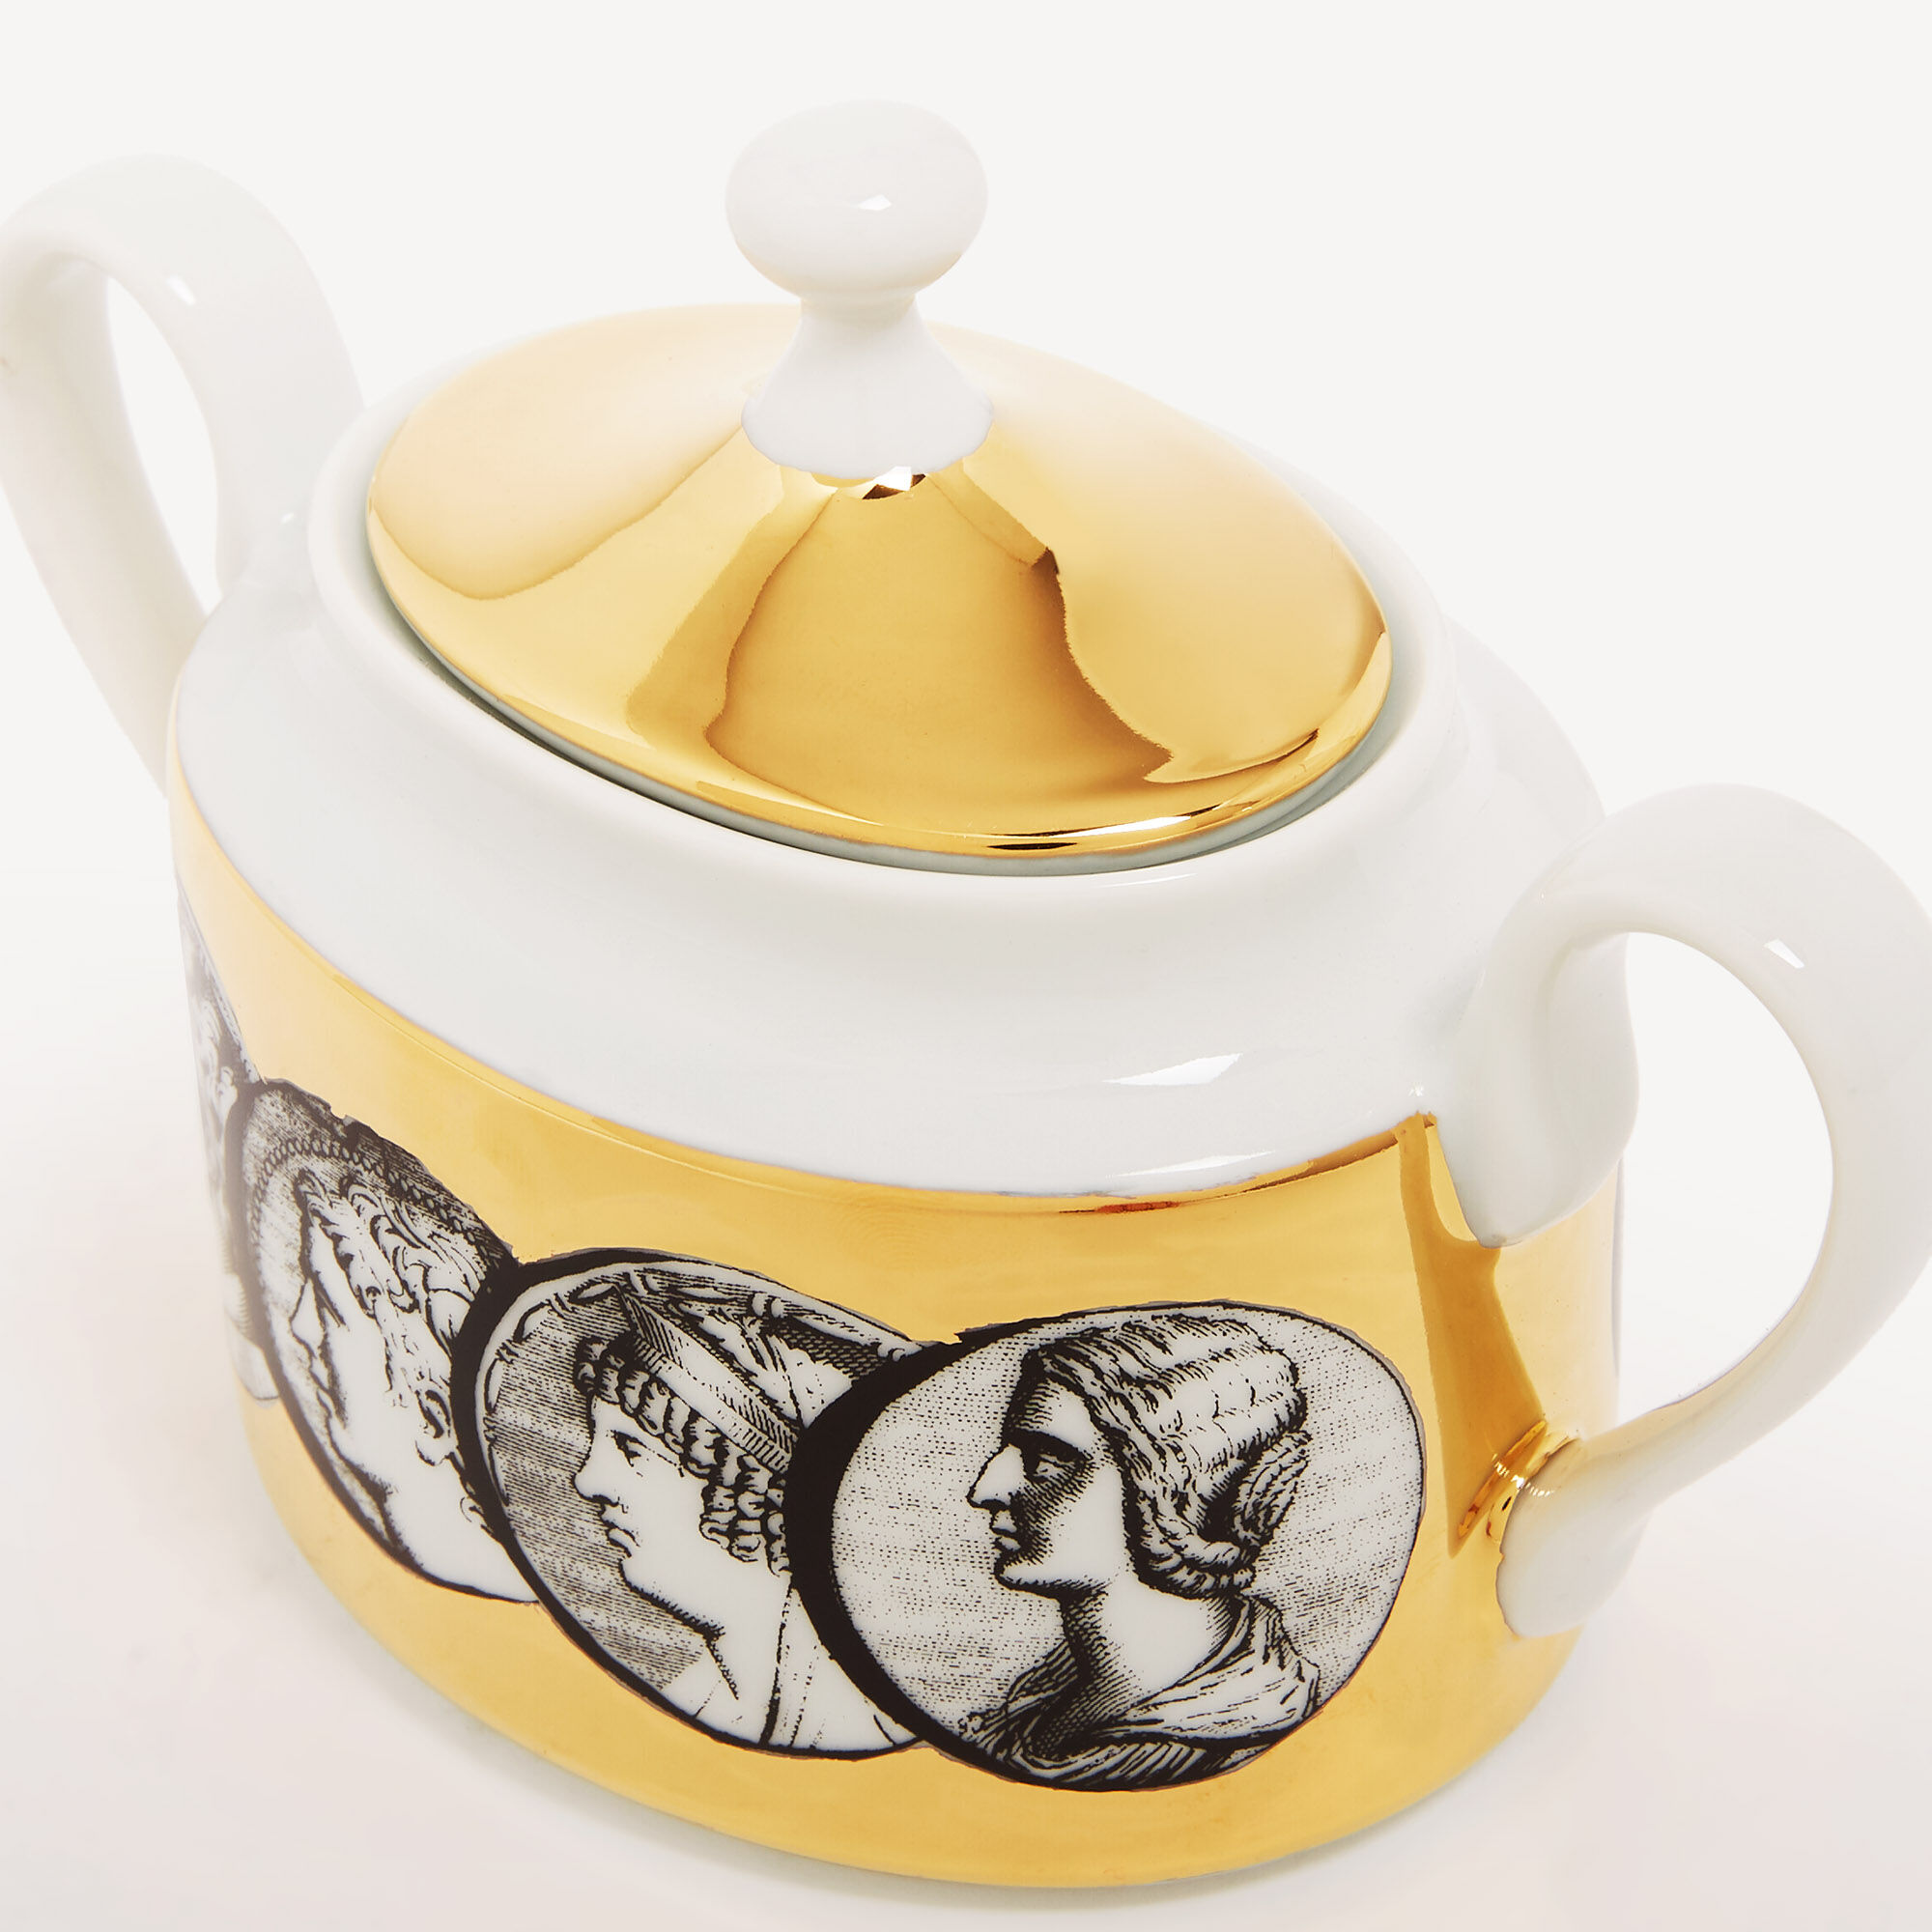 Fornasetti Cammei porcelain tea cup - Gold